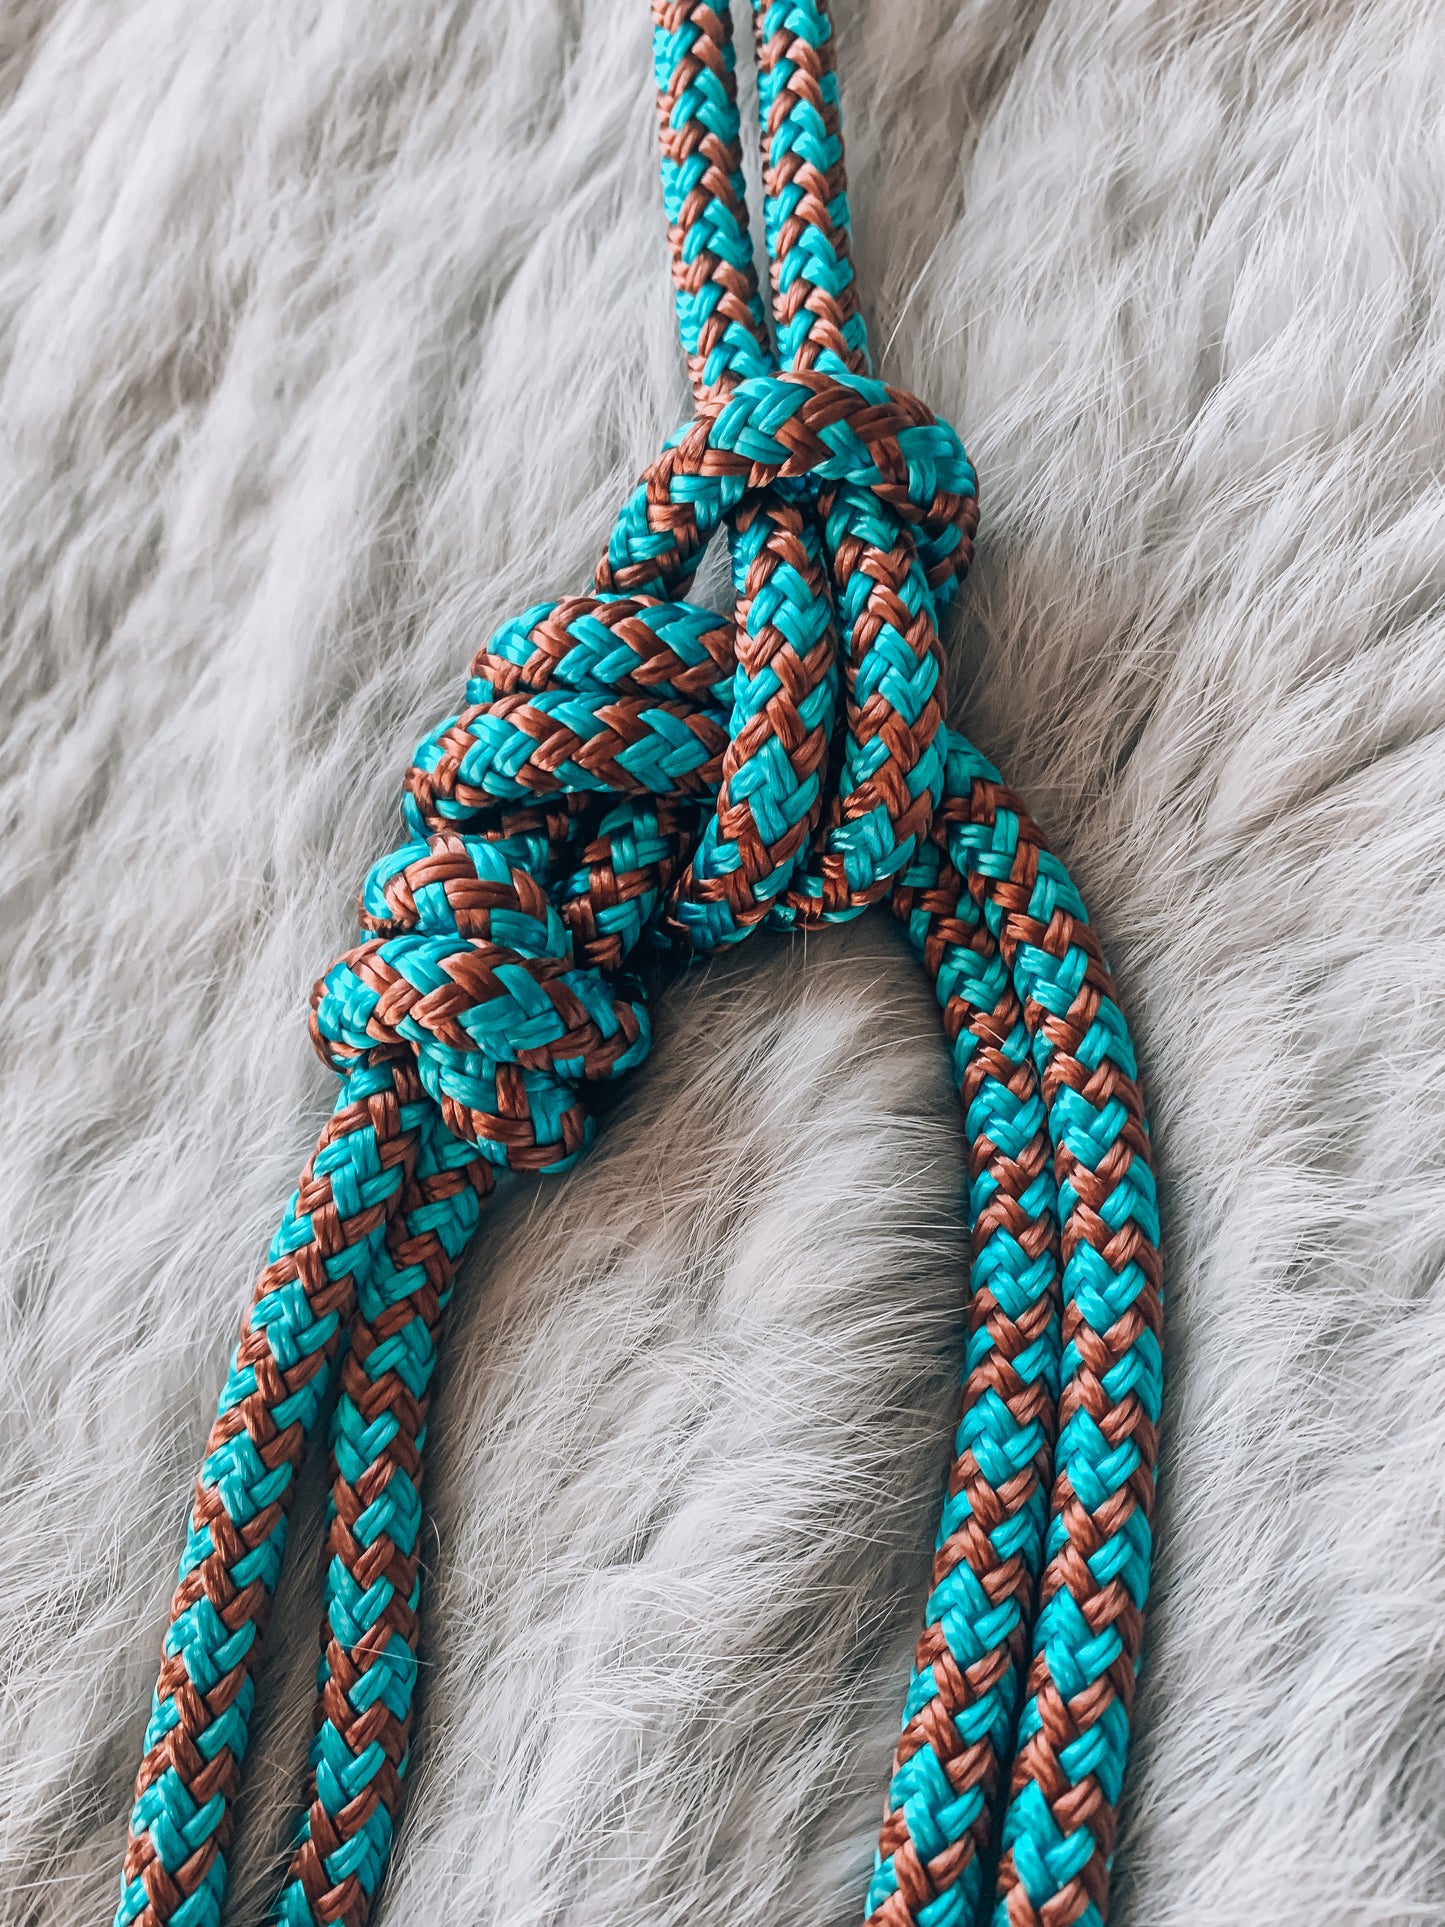 4 Knot Rope Halter - "KINGFISHER"